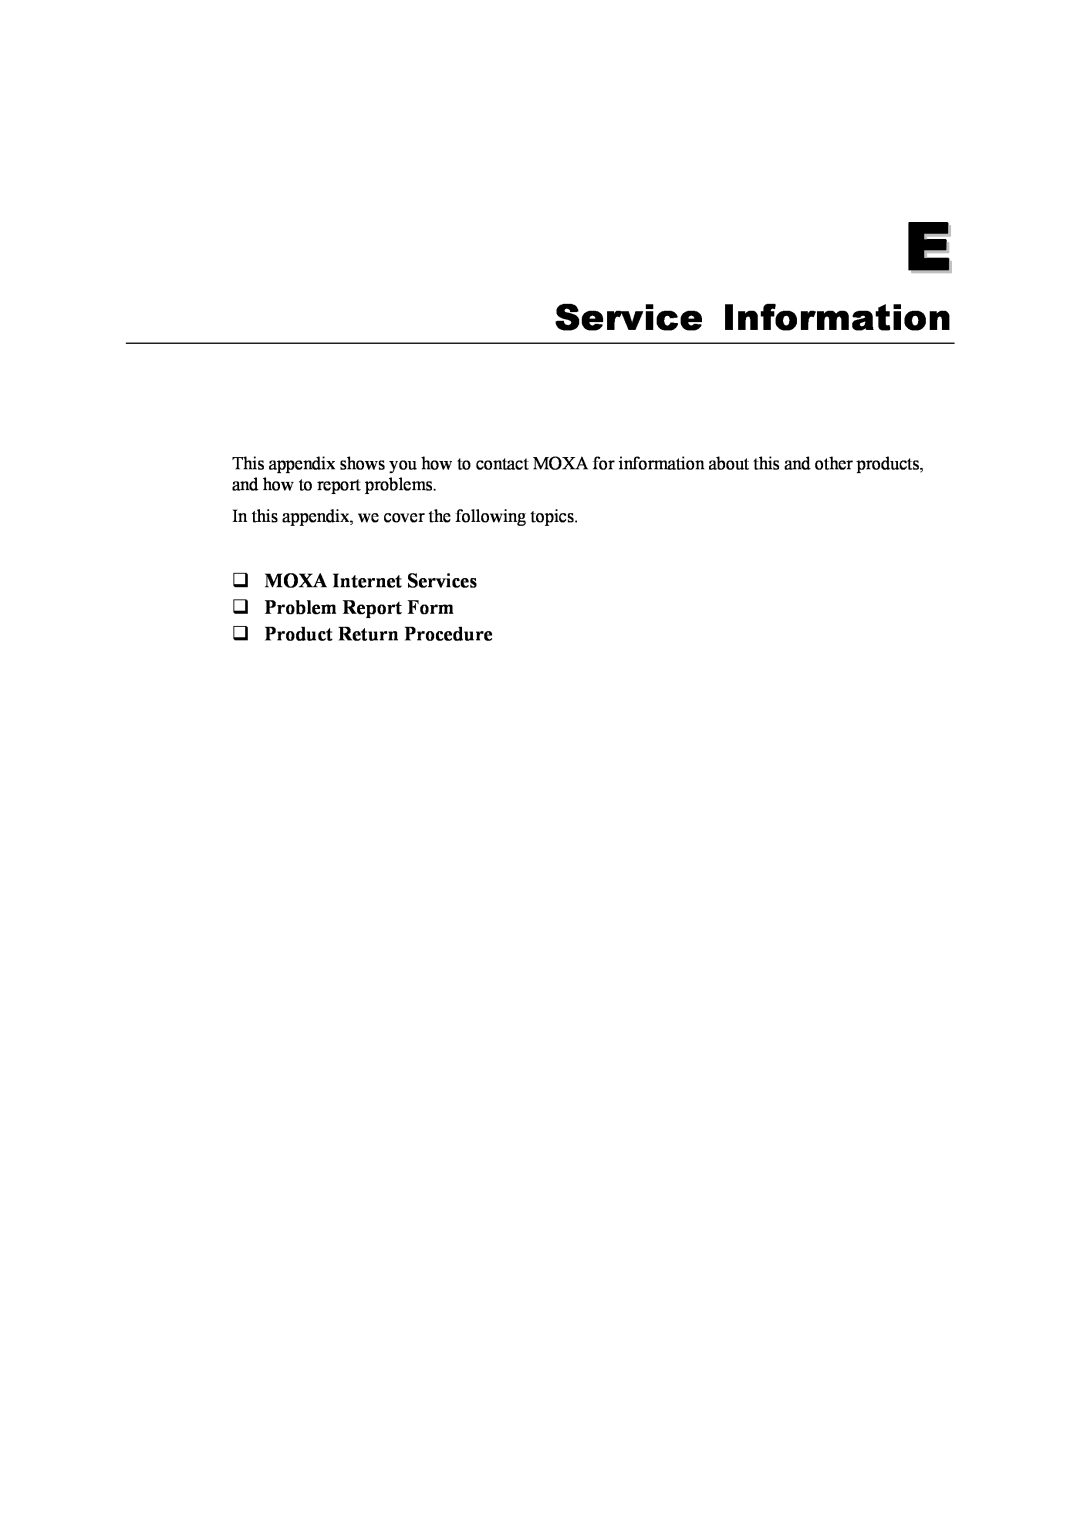 Moxa Technologies 5400 Series user manual Service Information, ‰ MOXA Internet Services ‰ Problem Report Form 